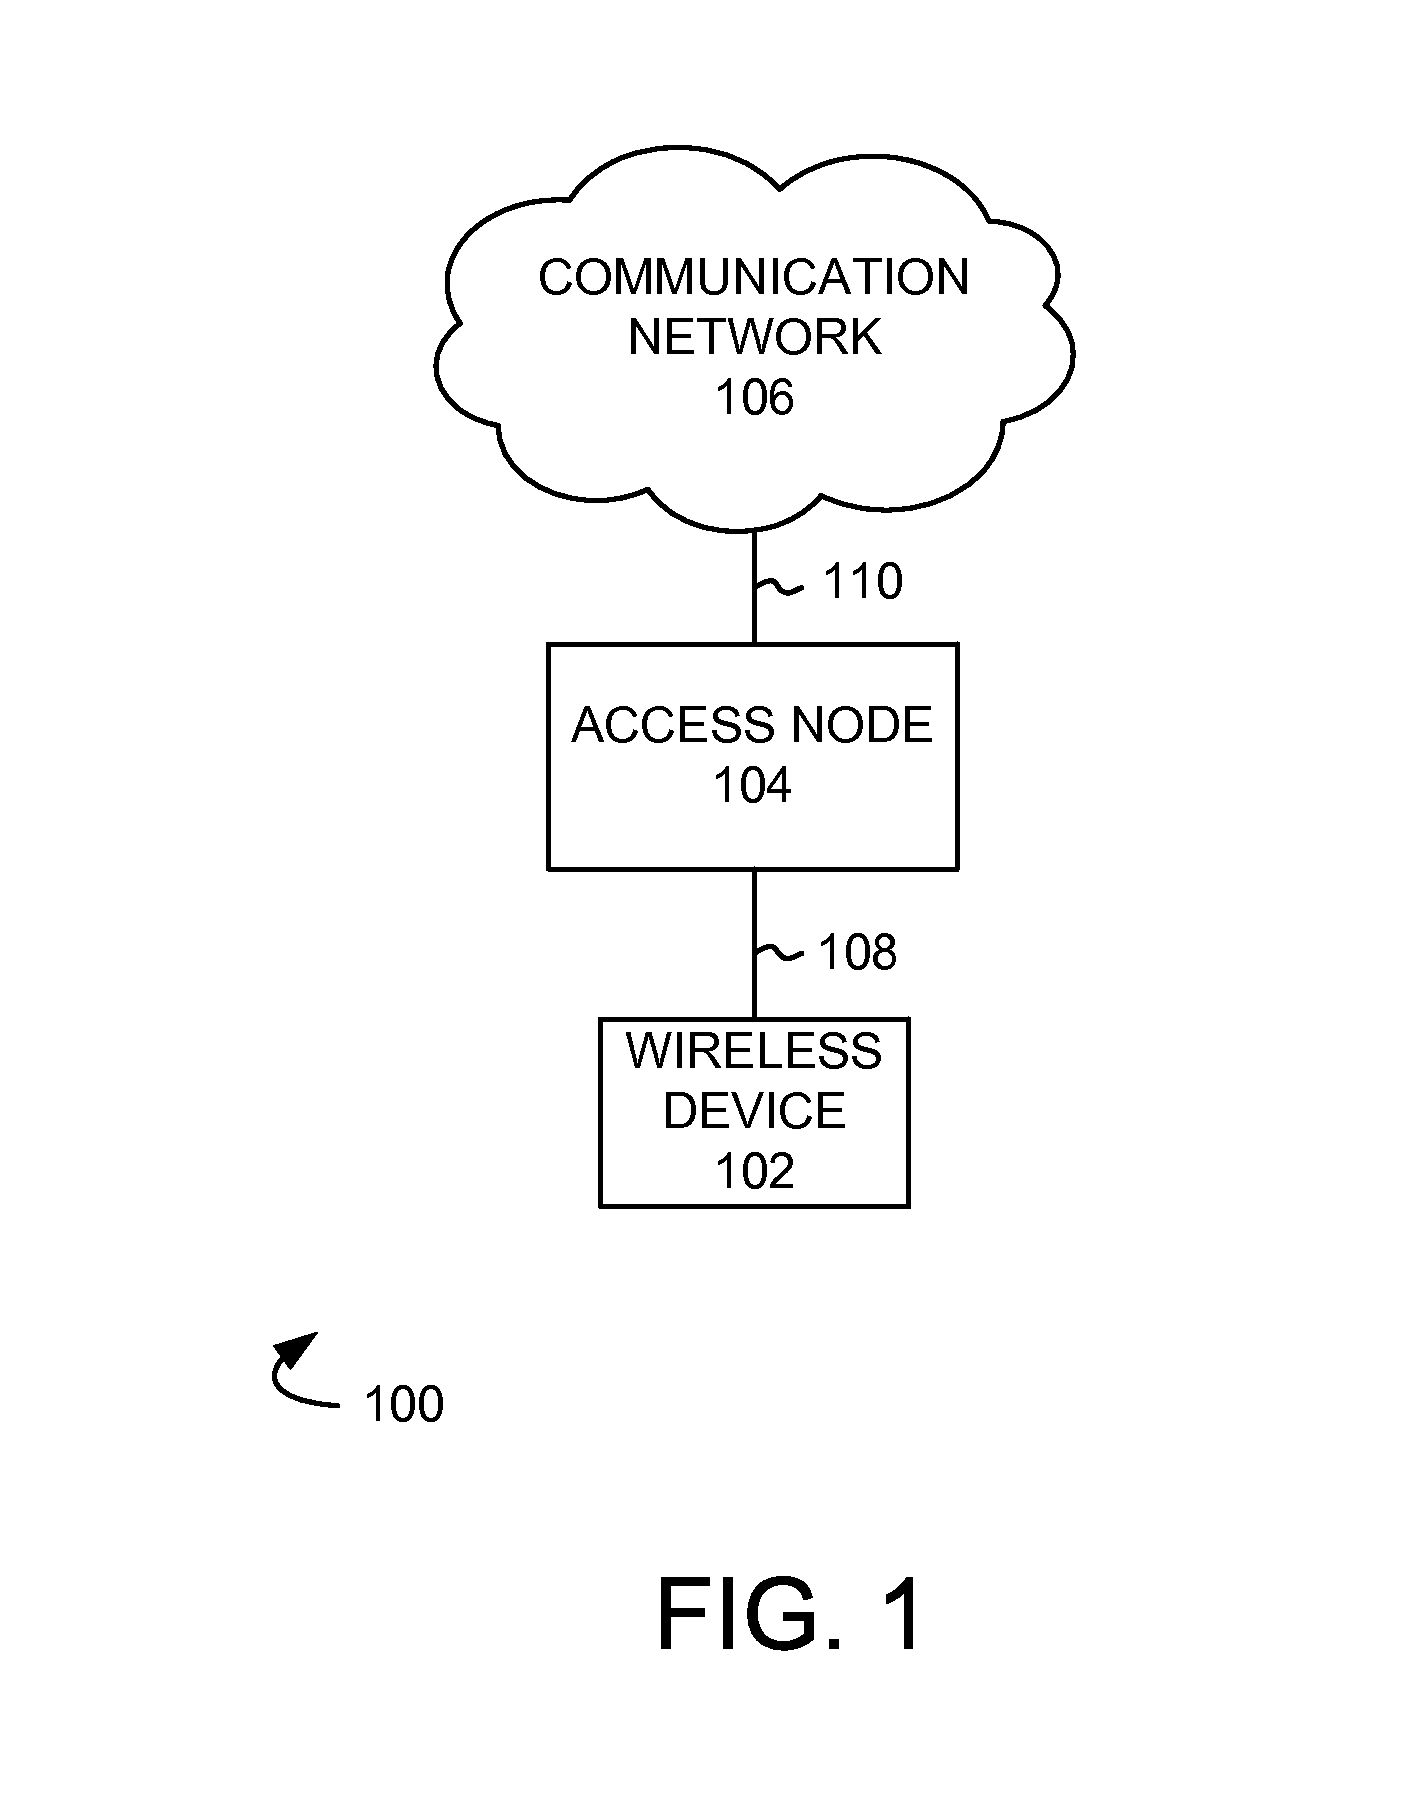 Multi-band communication with a wireless device